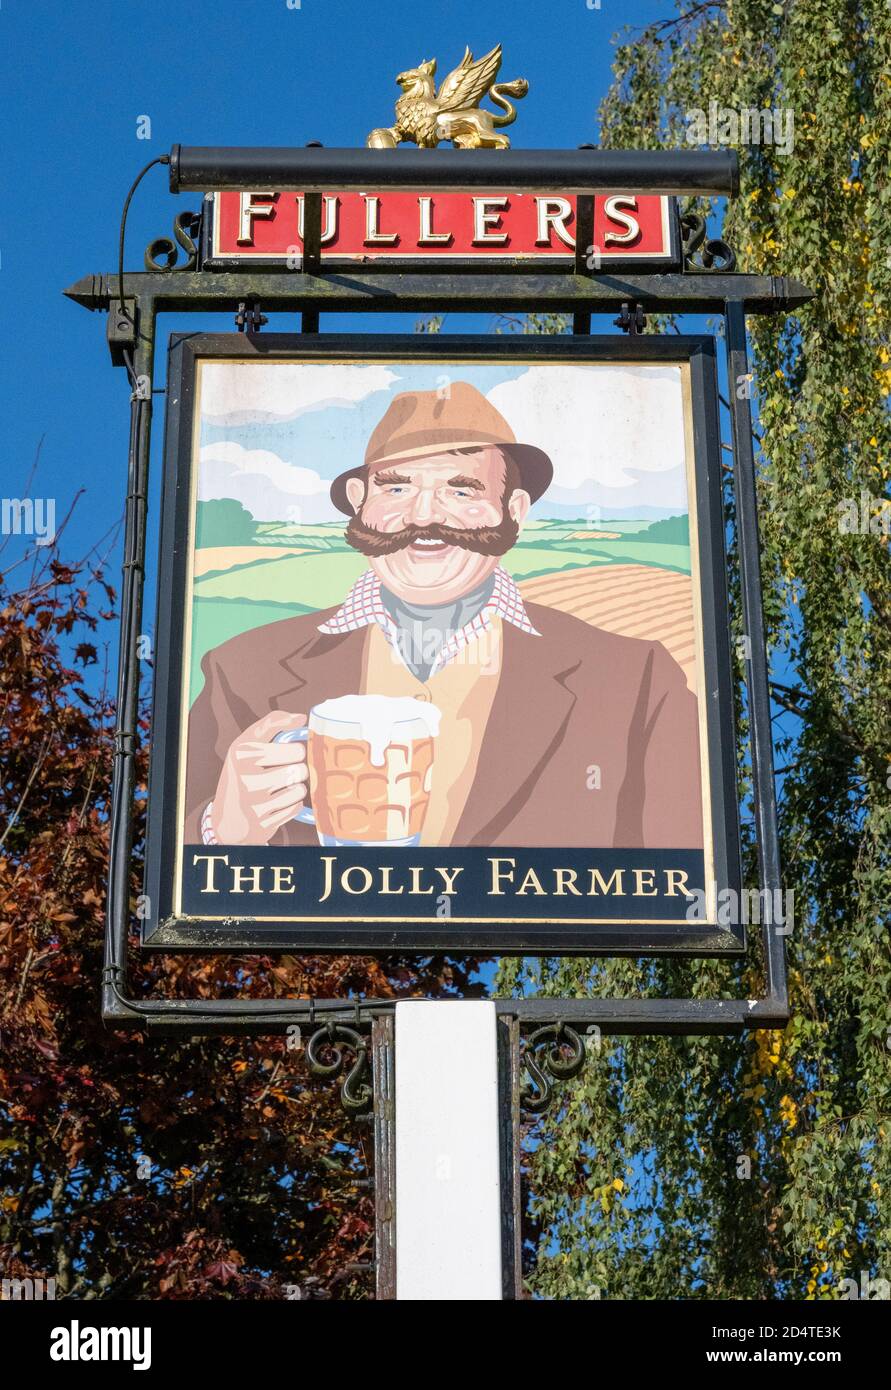 Traditional hanging pub sign at The Jolly Farmer a Fullers Pub and Restaurant, Blacknest, Alton, Hampshire, England, UK Stock Photo